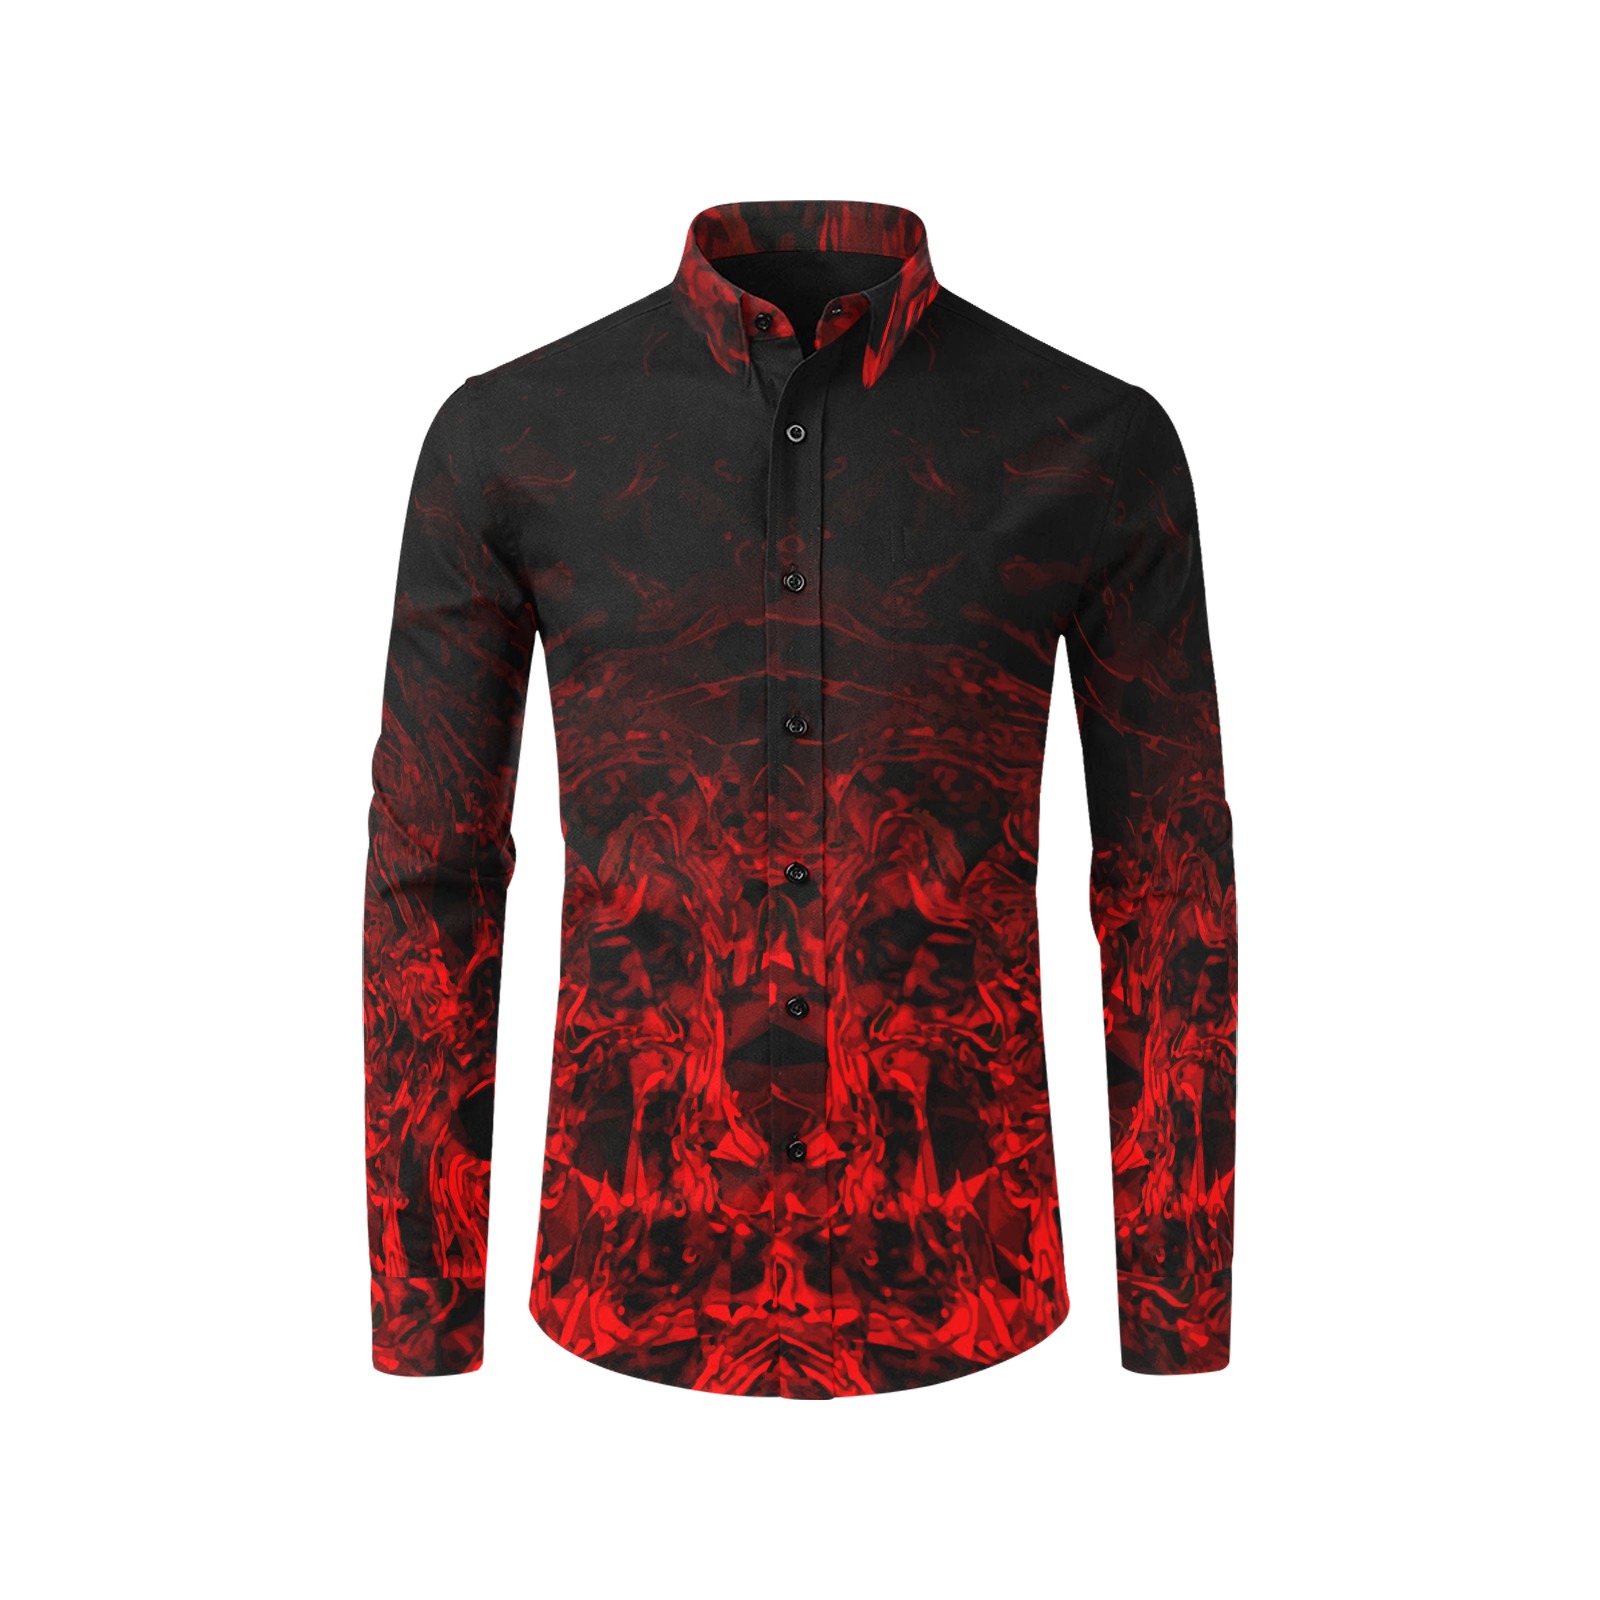 Red Nite - black and red geometric swirl gradient Men's All Over Print Casual Dress Shirt (Model T61)